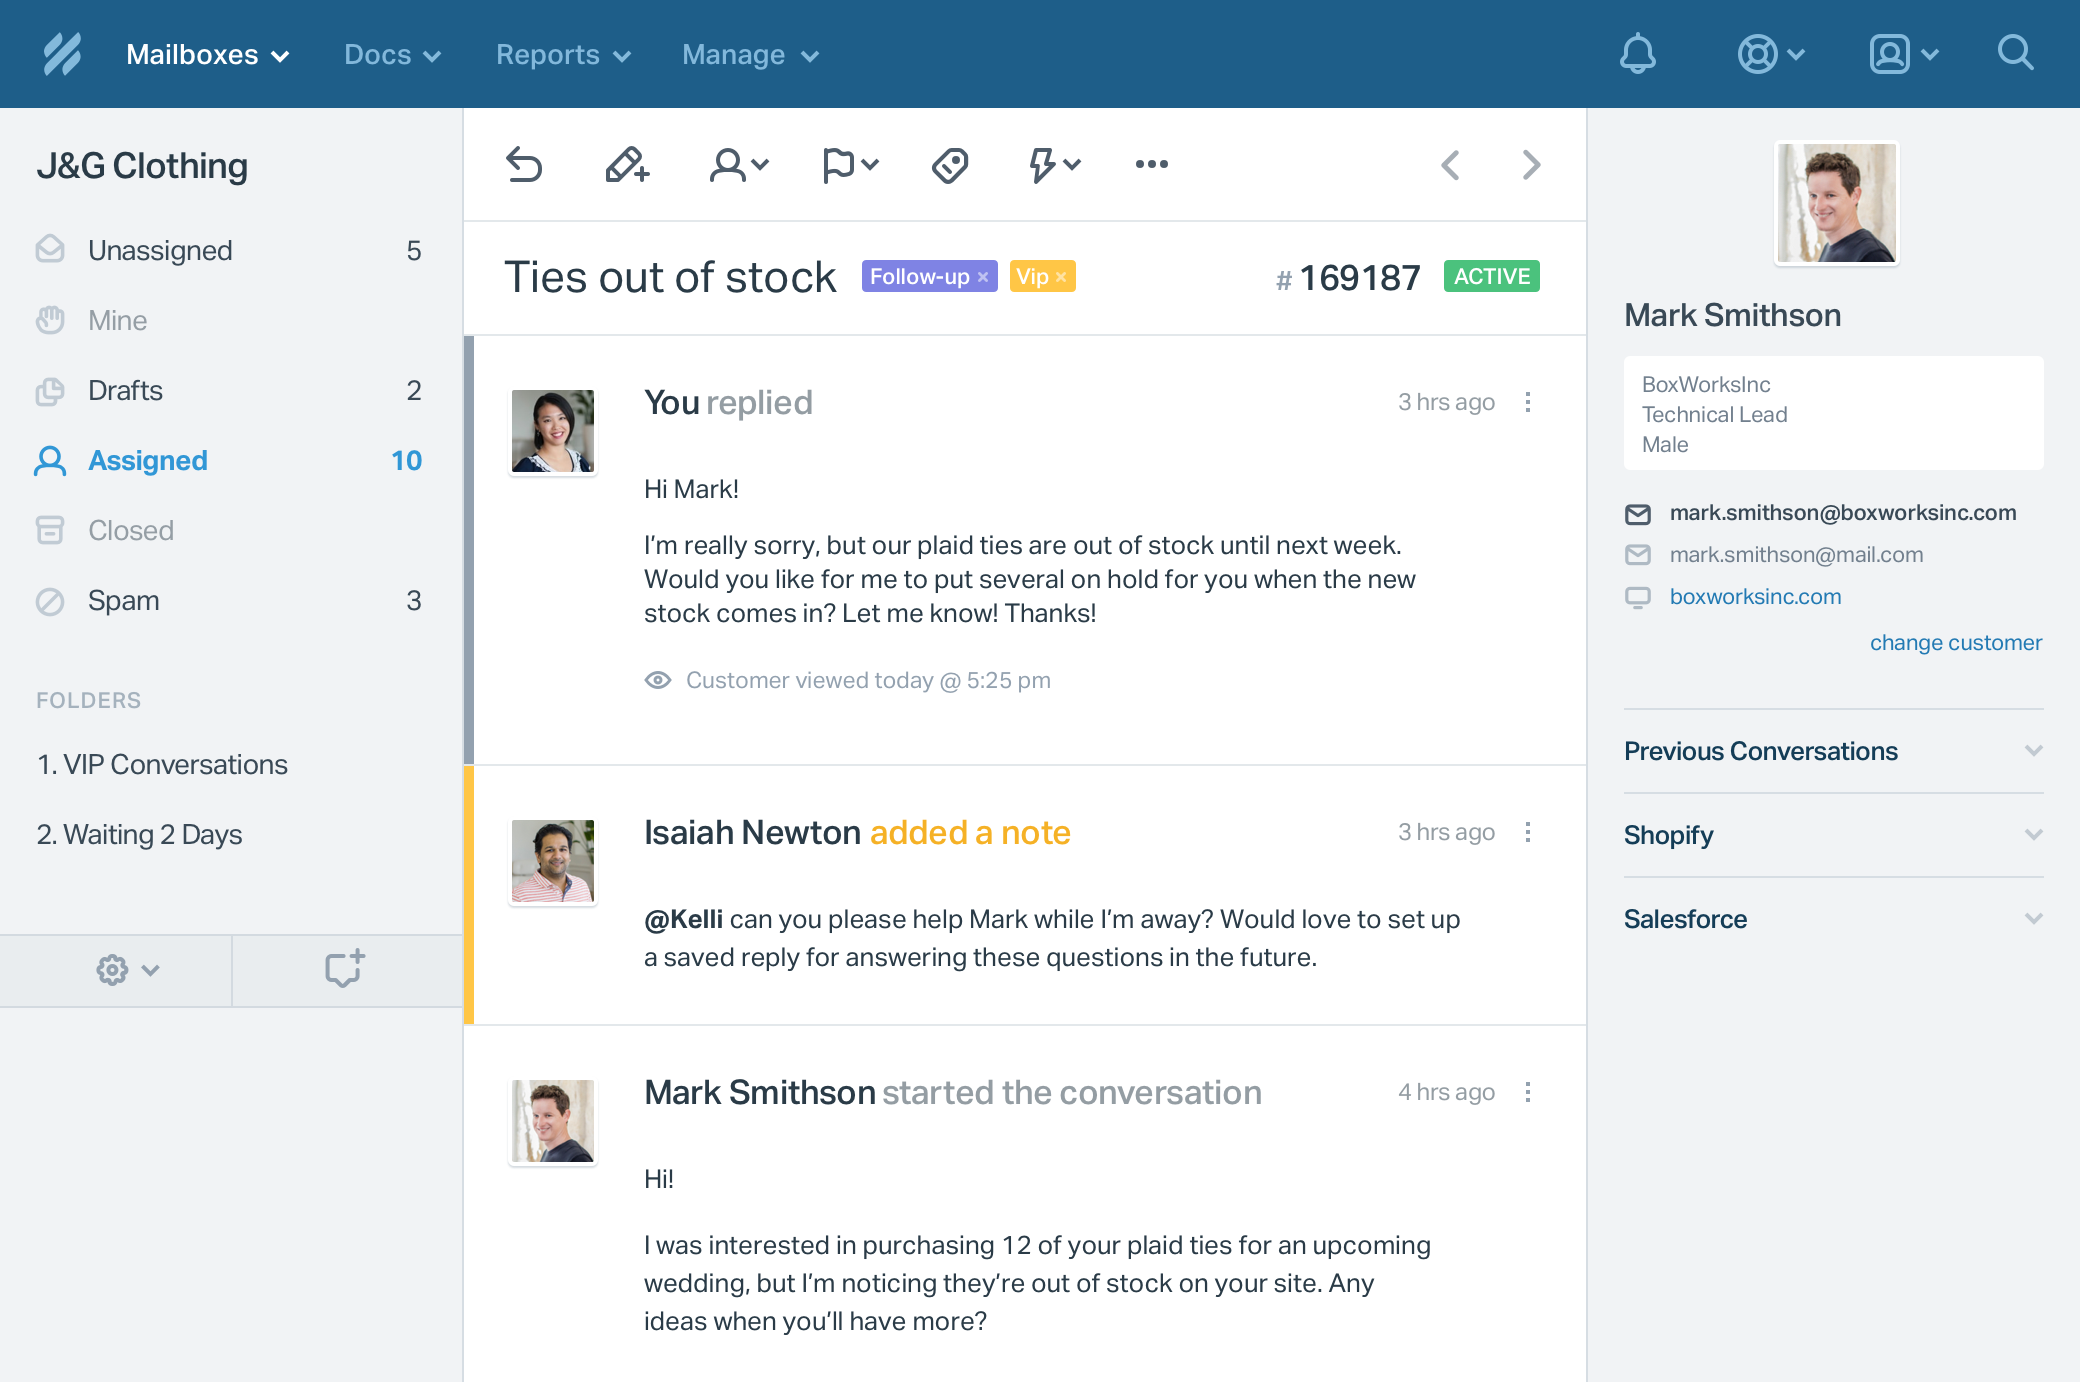 With Help Scout's familiar interface, your team can start responding to emails in minutes. Plus, get access to organization, automation, and collaboration tools to make your job easier.